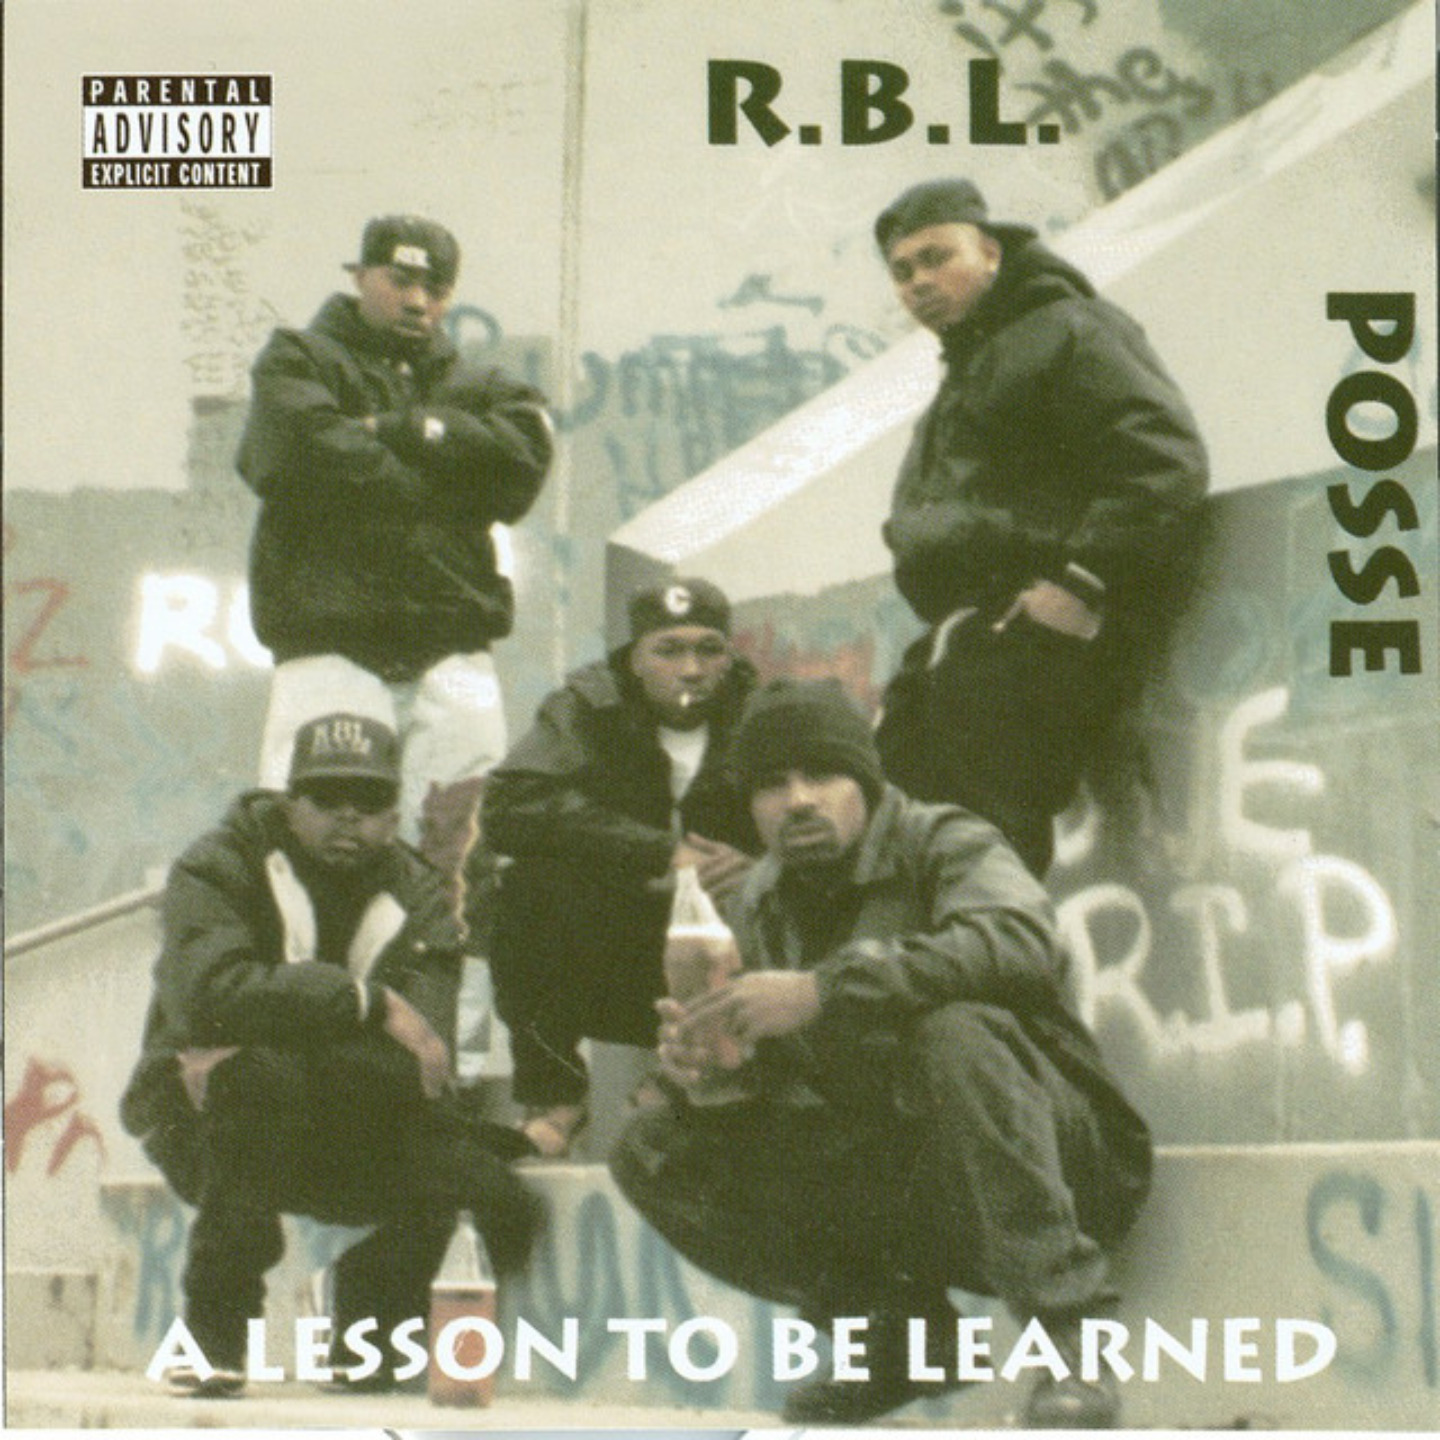 RBL POSSE - A Lesson To Be Learned LP (30th Anniversary Edition, Clear Vinyl)